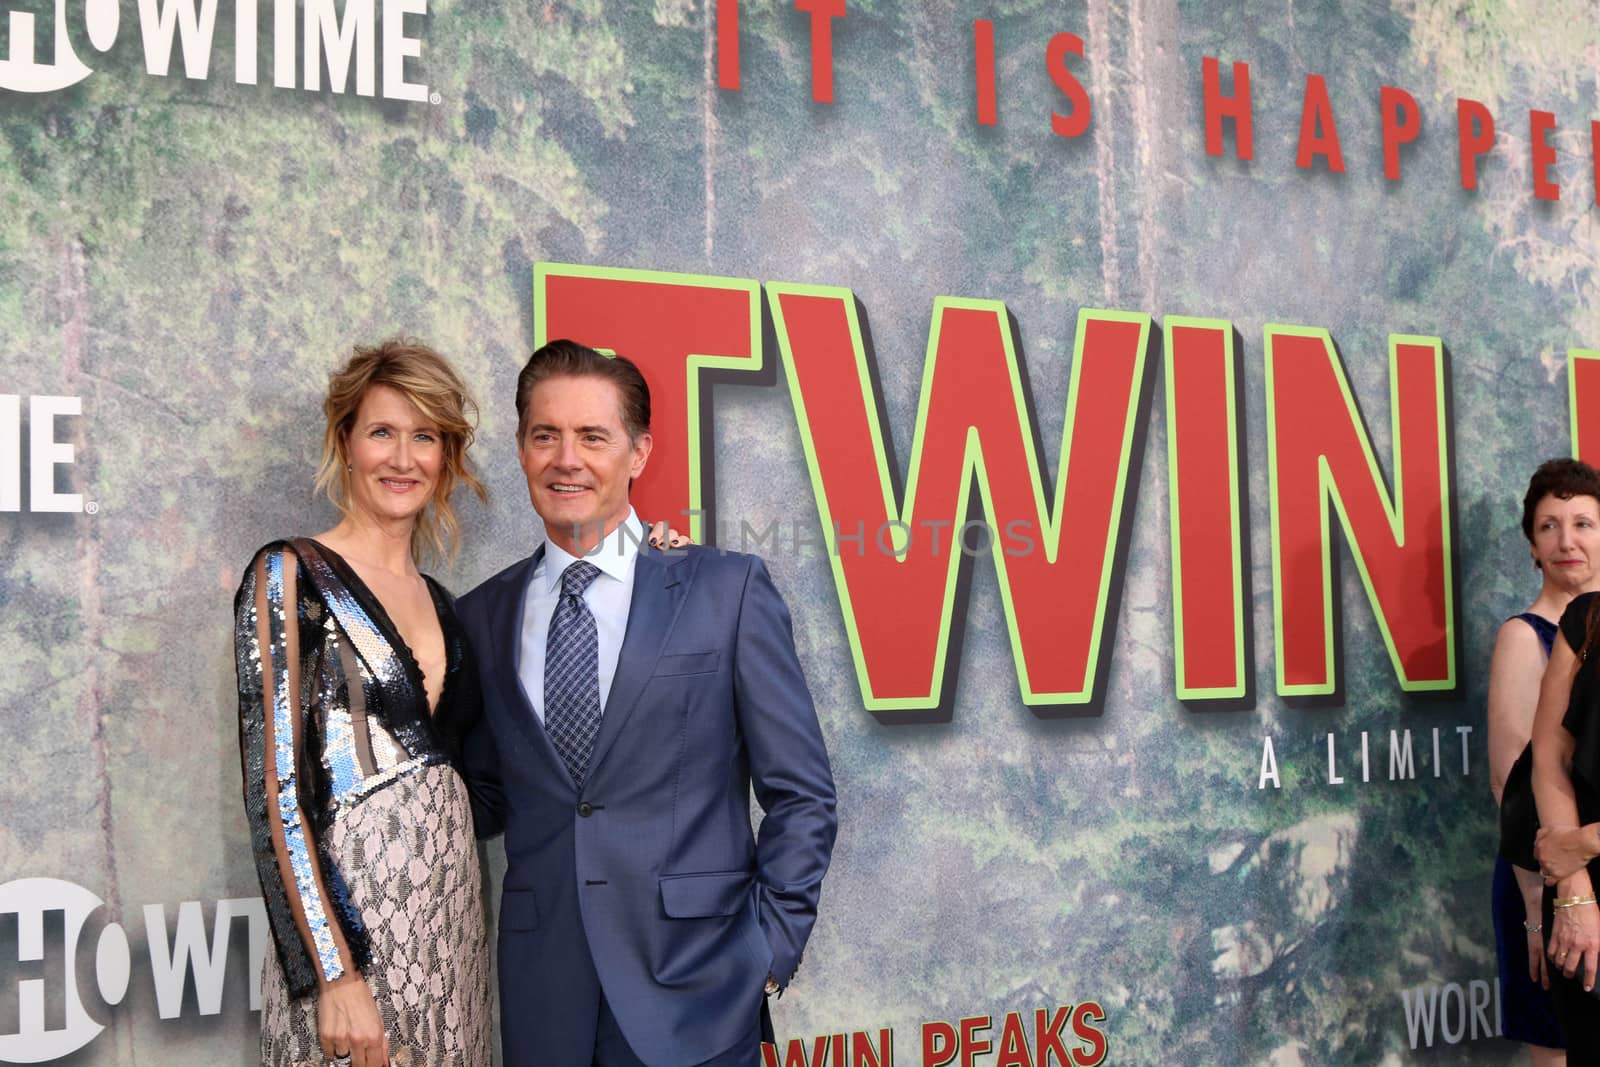 Laura Dern, Kyle MacLachlan
at the "Twin Peaks" Premiere Screening, The Theater at Ace Hotel, Los Angeles, CA 05-19-17/ImageCollect by ImageCollect